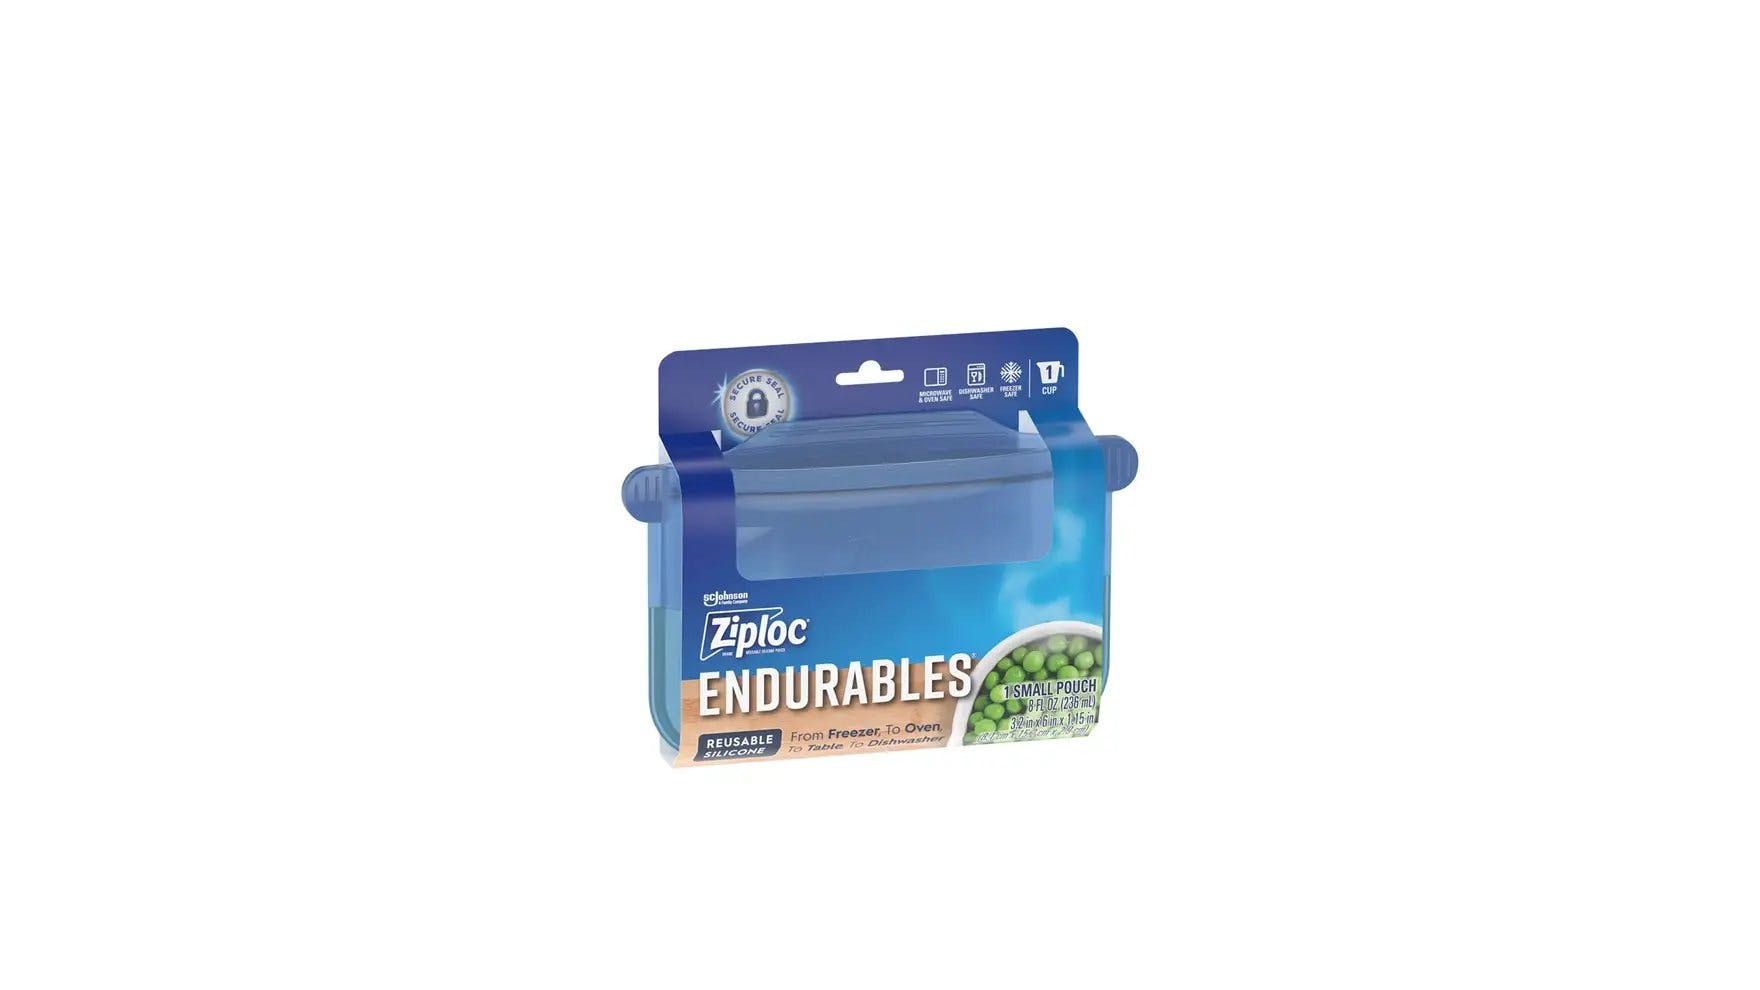 Front of Ziploc Endurables small pouches packaging.